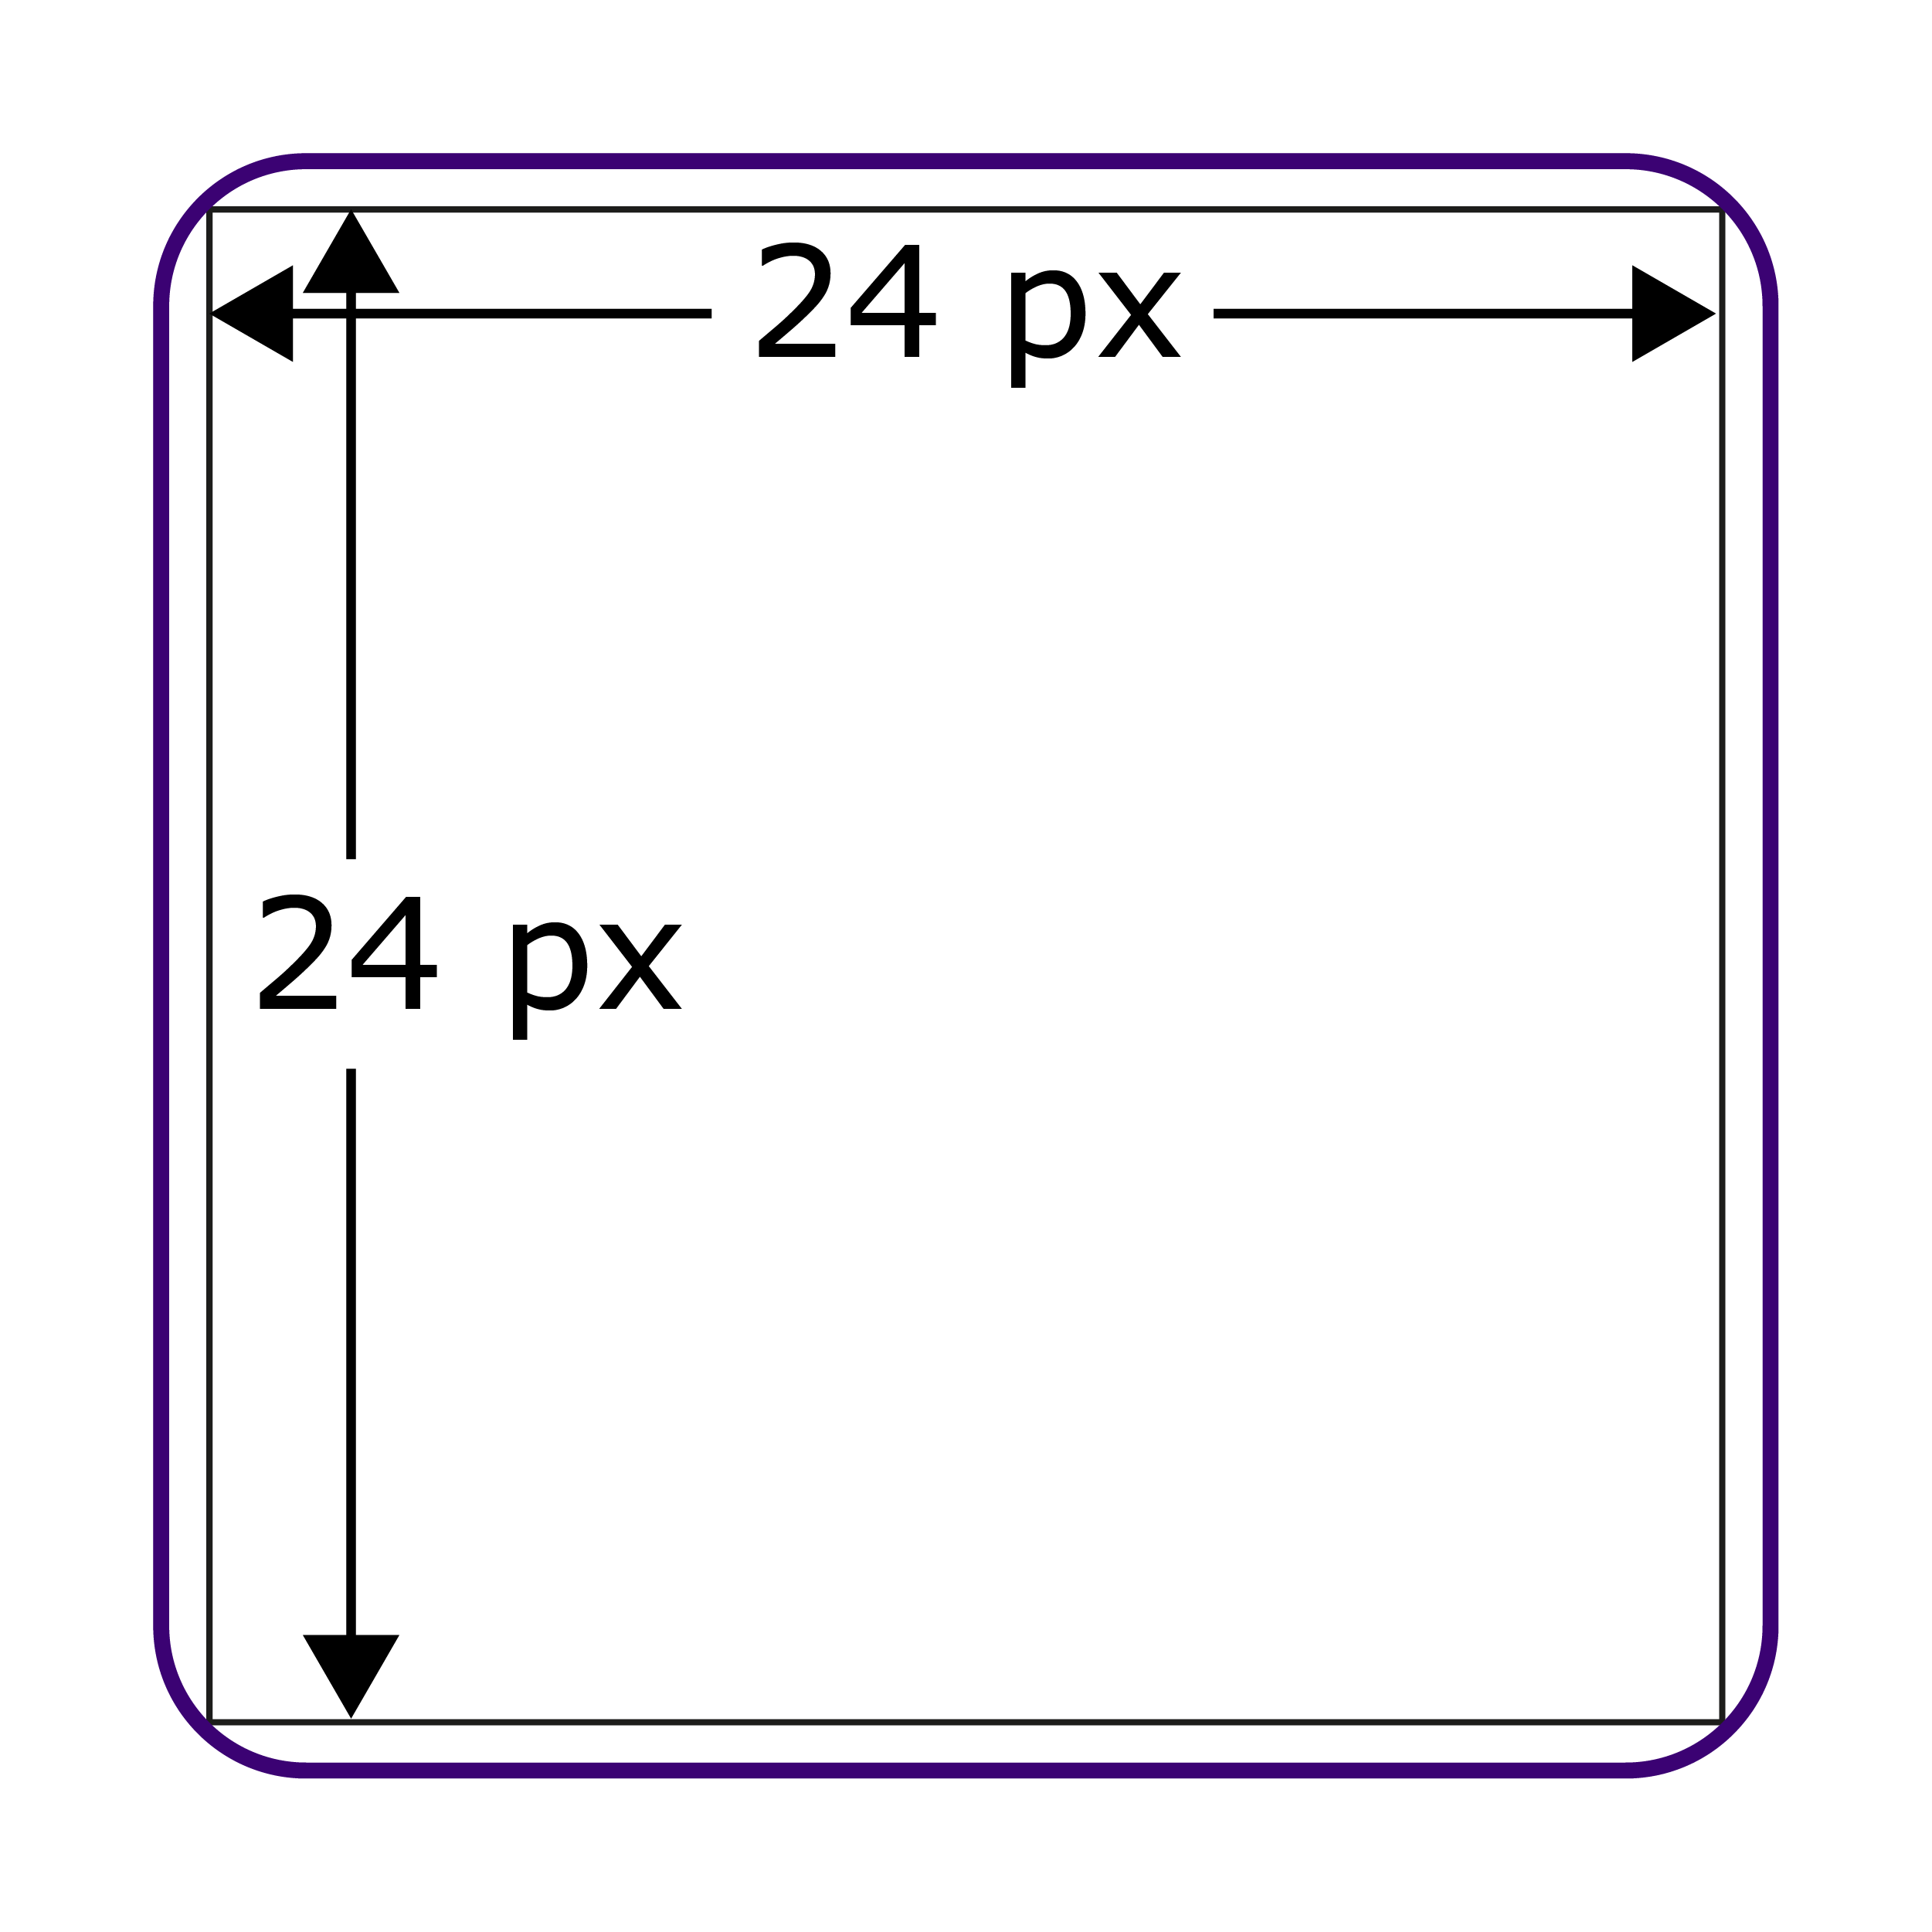 Checkbox with rounded corners but with the 24 by 24 box inside the whole shape